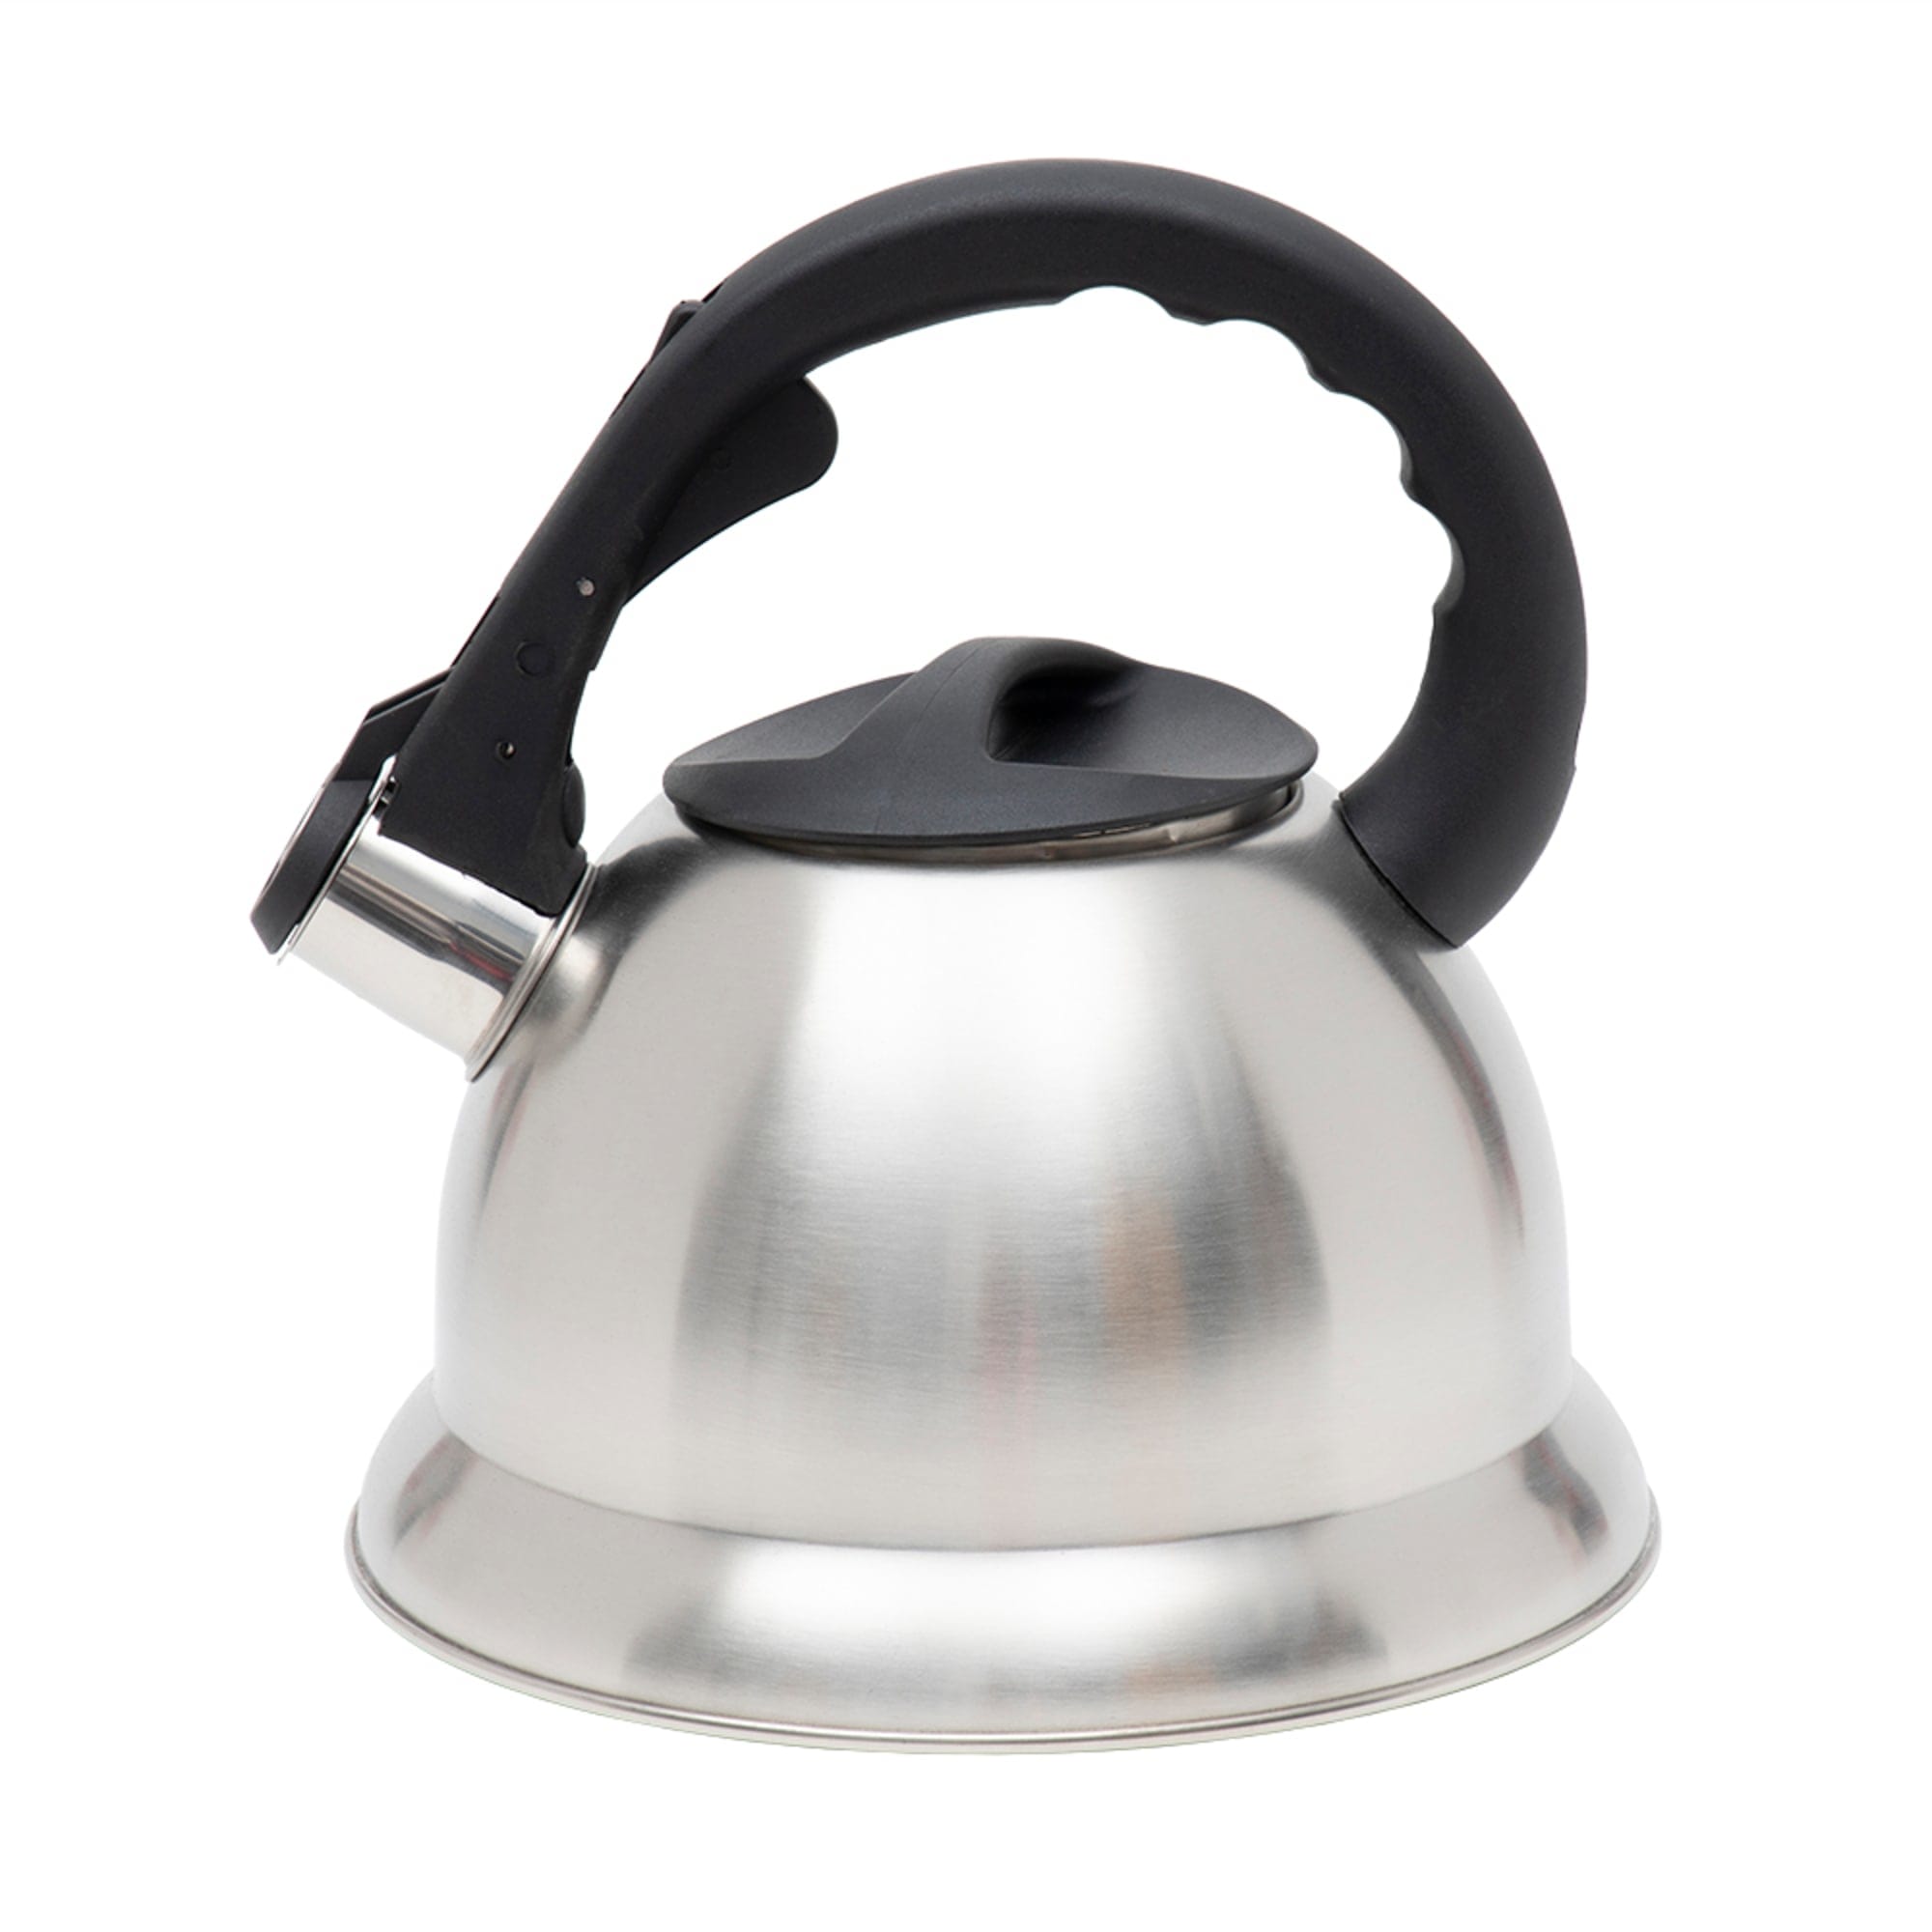 Home Basics 3.0 Liter Brushed Stainless Steel Tea Kettle with Easy Grip Textured Handle, Silver $15.00 EACH, CASE PACK OF 12